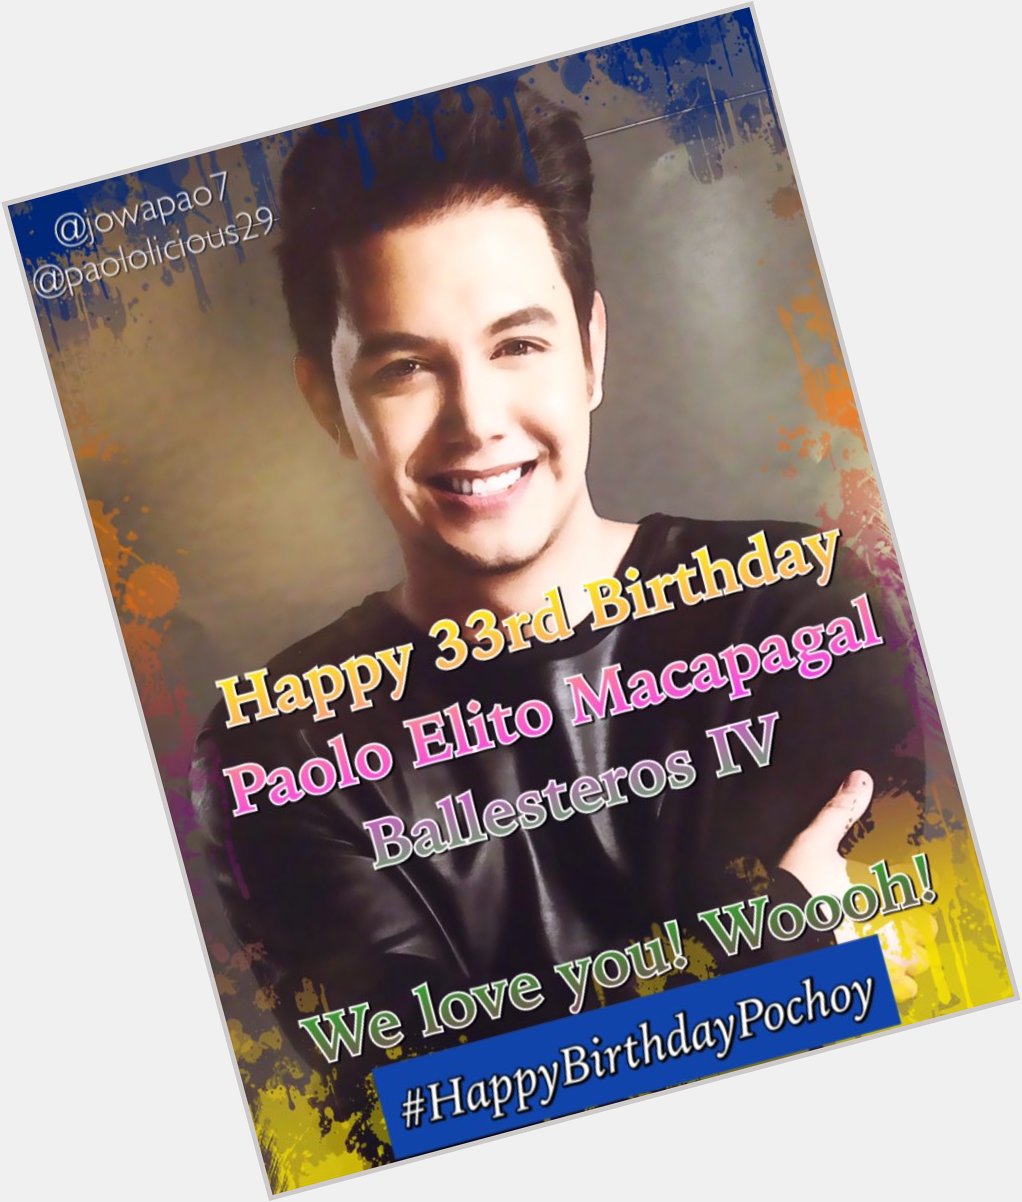 Happy birthday Mr. Paolo Ballesteros! Woooh!
Lots of love. 